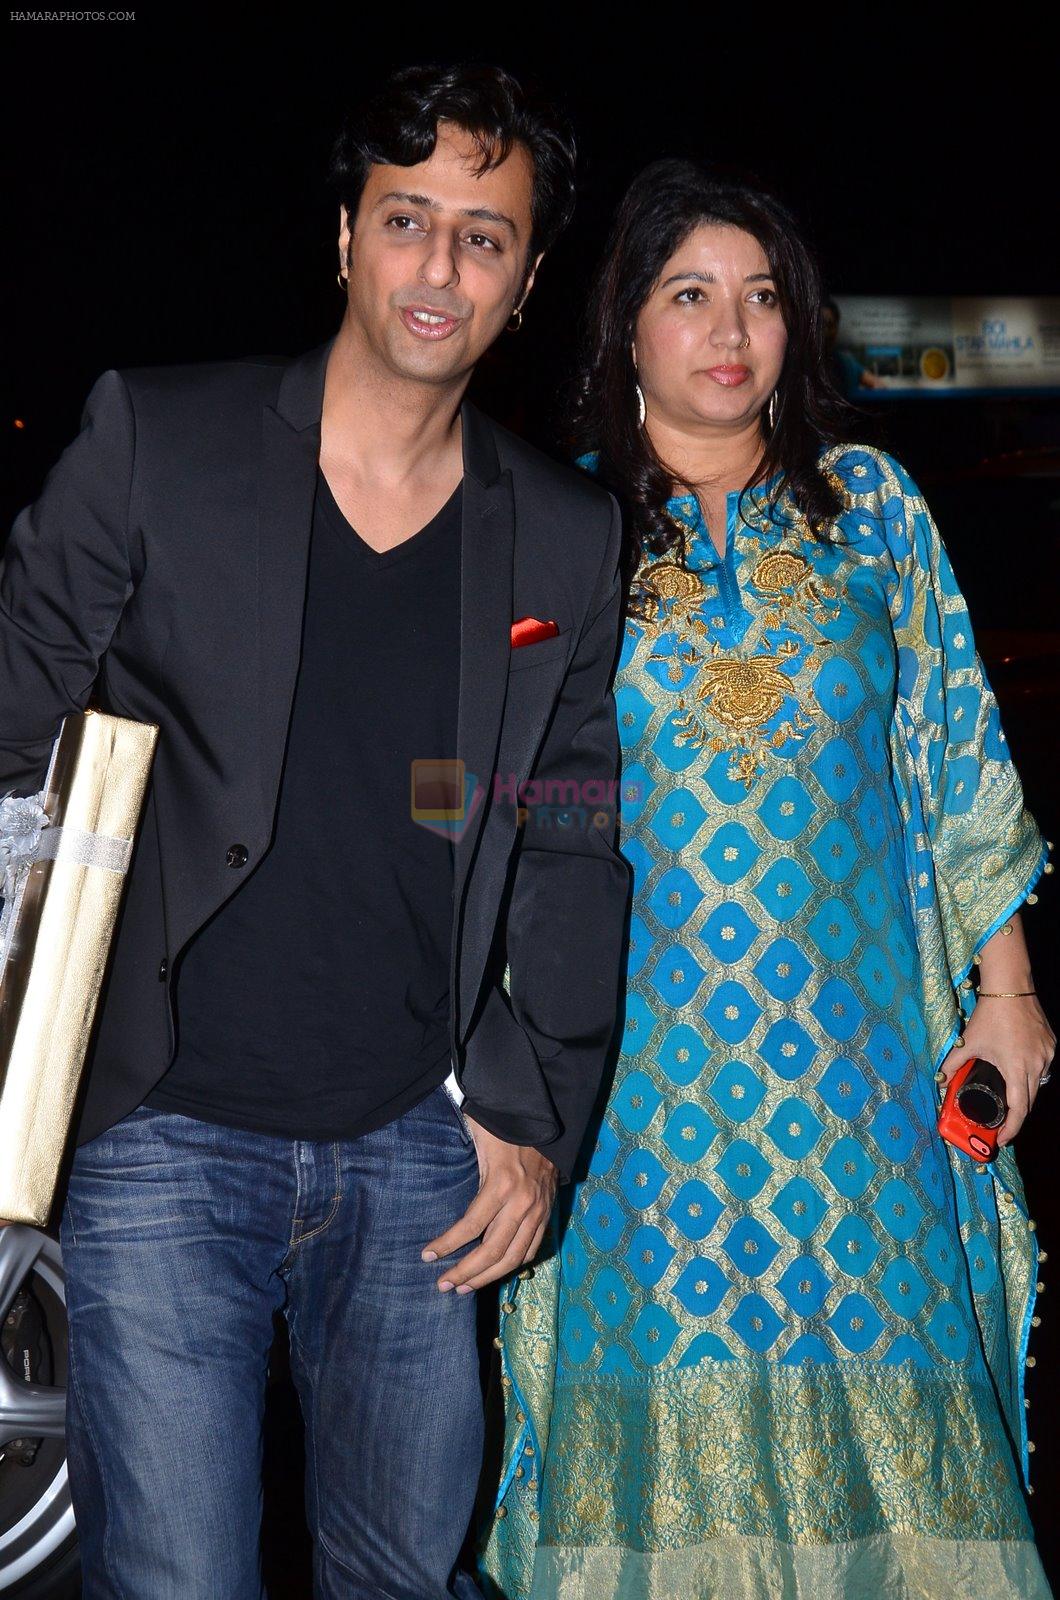 Salim merchant at Vikram Singh's Brother Uday and Ali Morani's daughter Shirin's Sangeet Ceremony in Blue sea on 20th Dec 2014